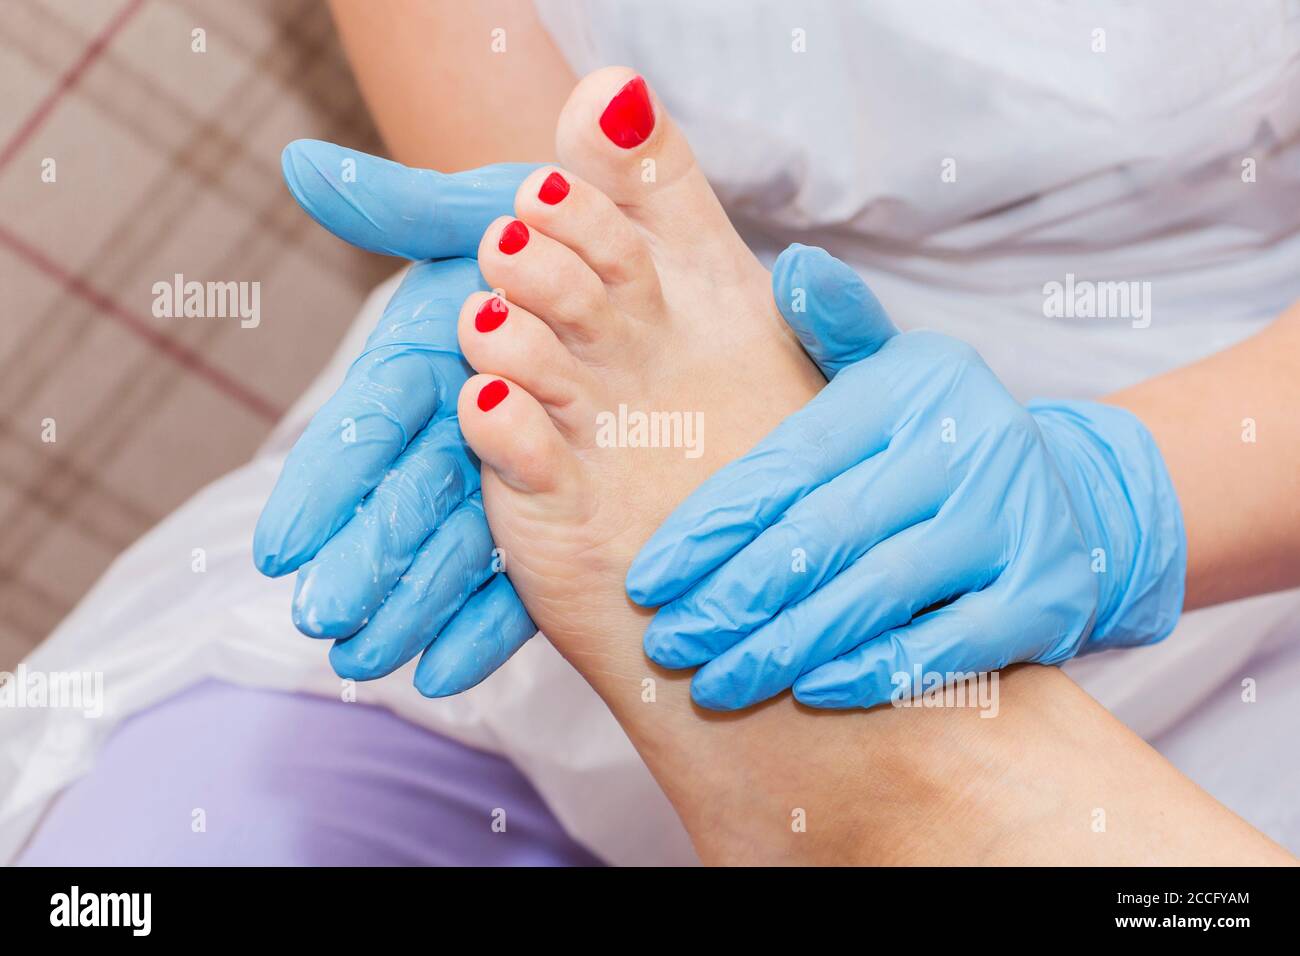 Pedicure Dead Skin Remover Feet Care Woman Stock Photo - Image of  lifestyle, nail: 61775090